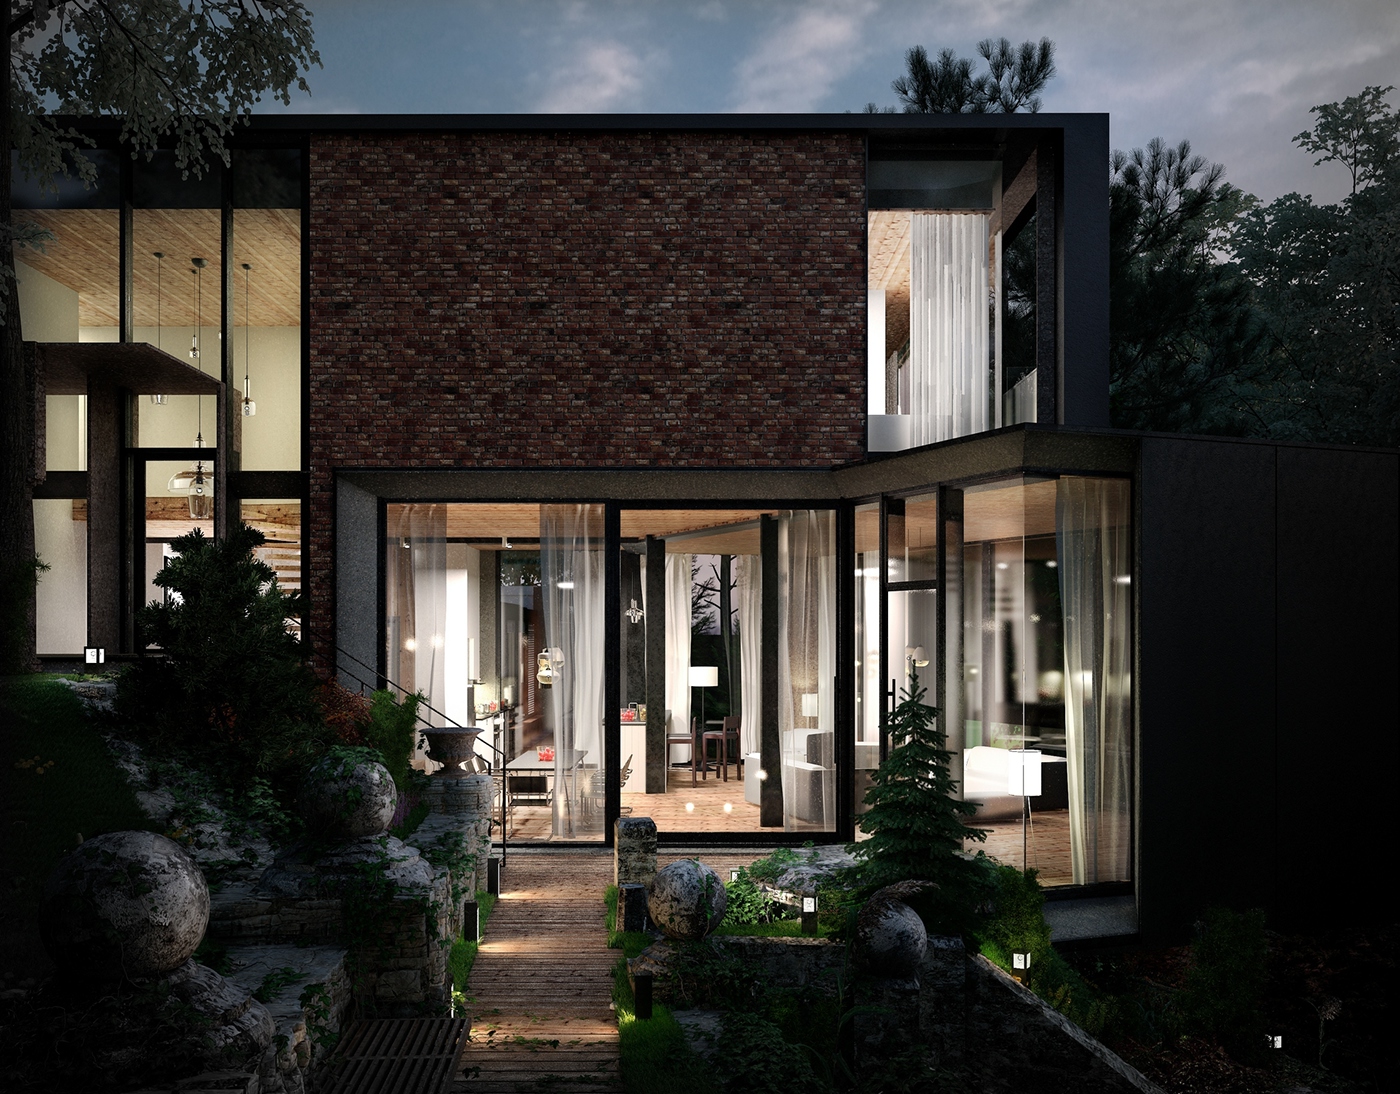 dwelling architecture Project house contemporary brick modern appartment SAOTA visualization